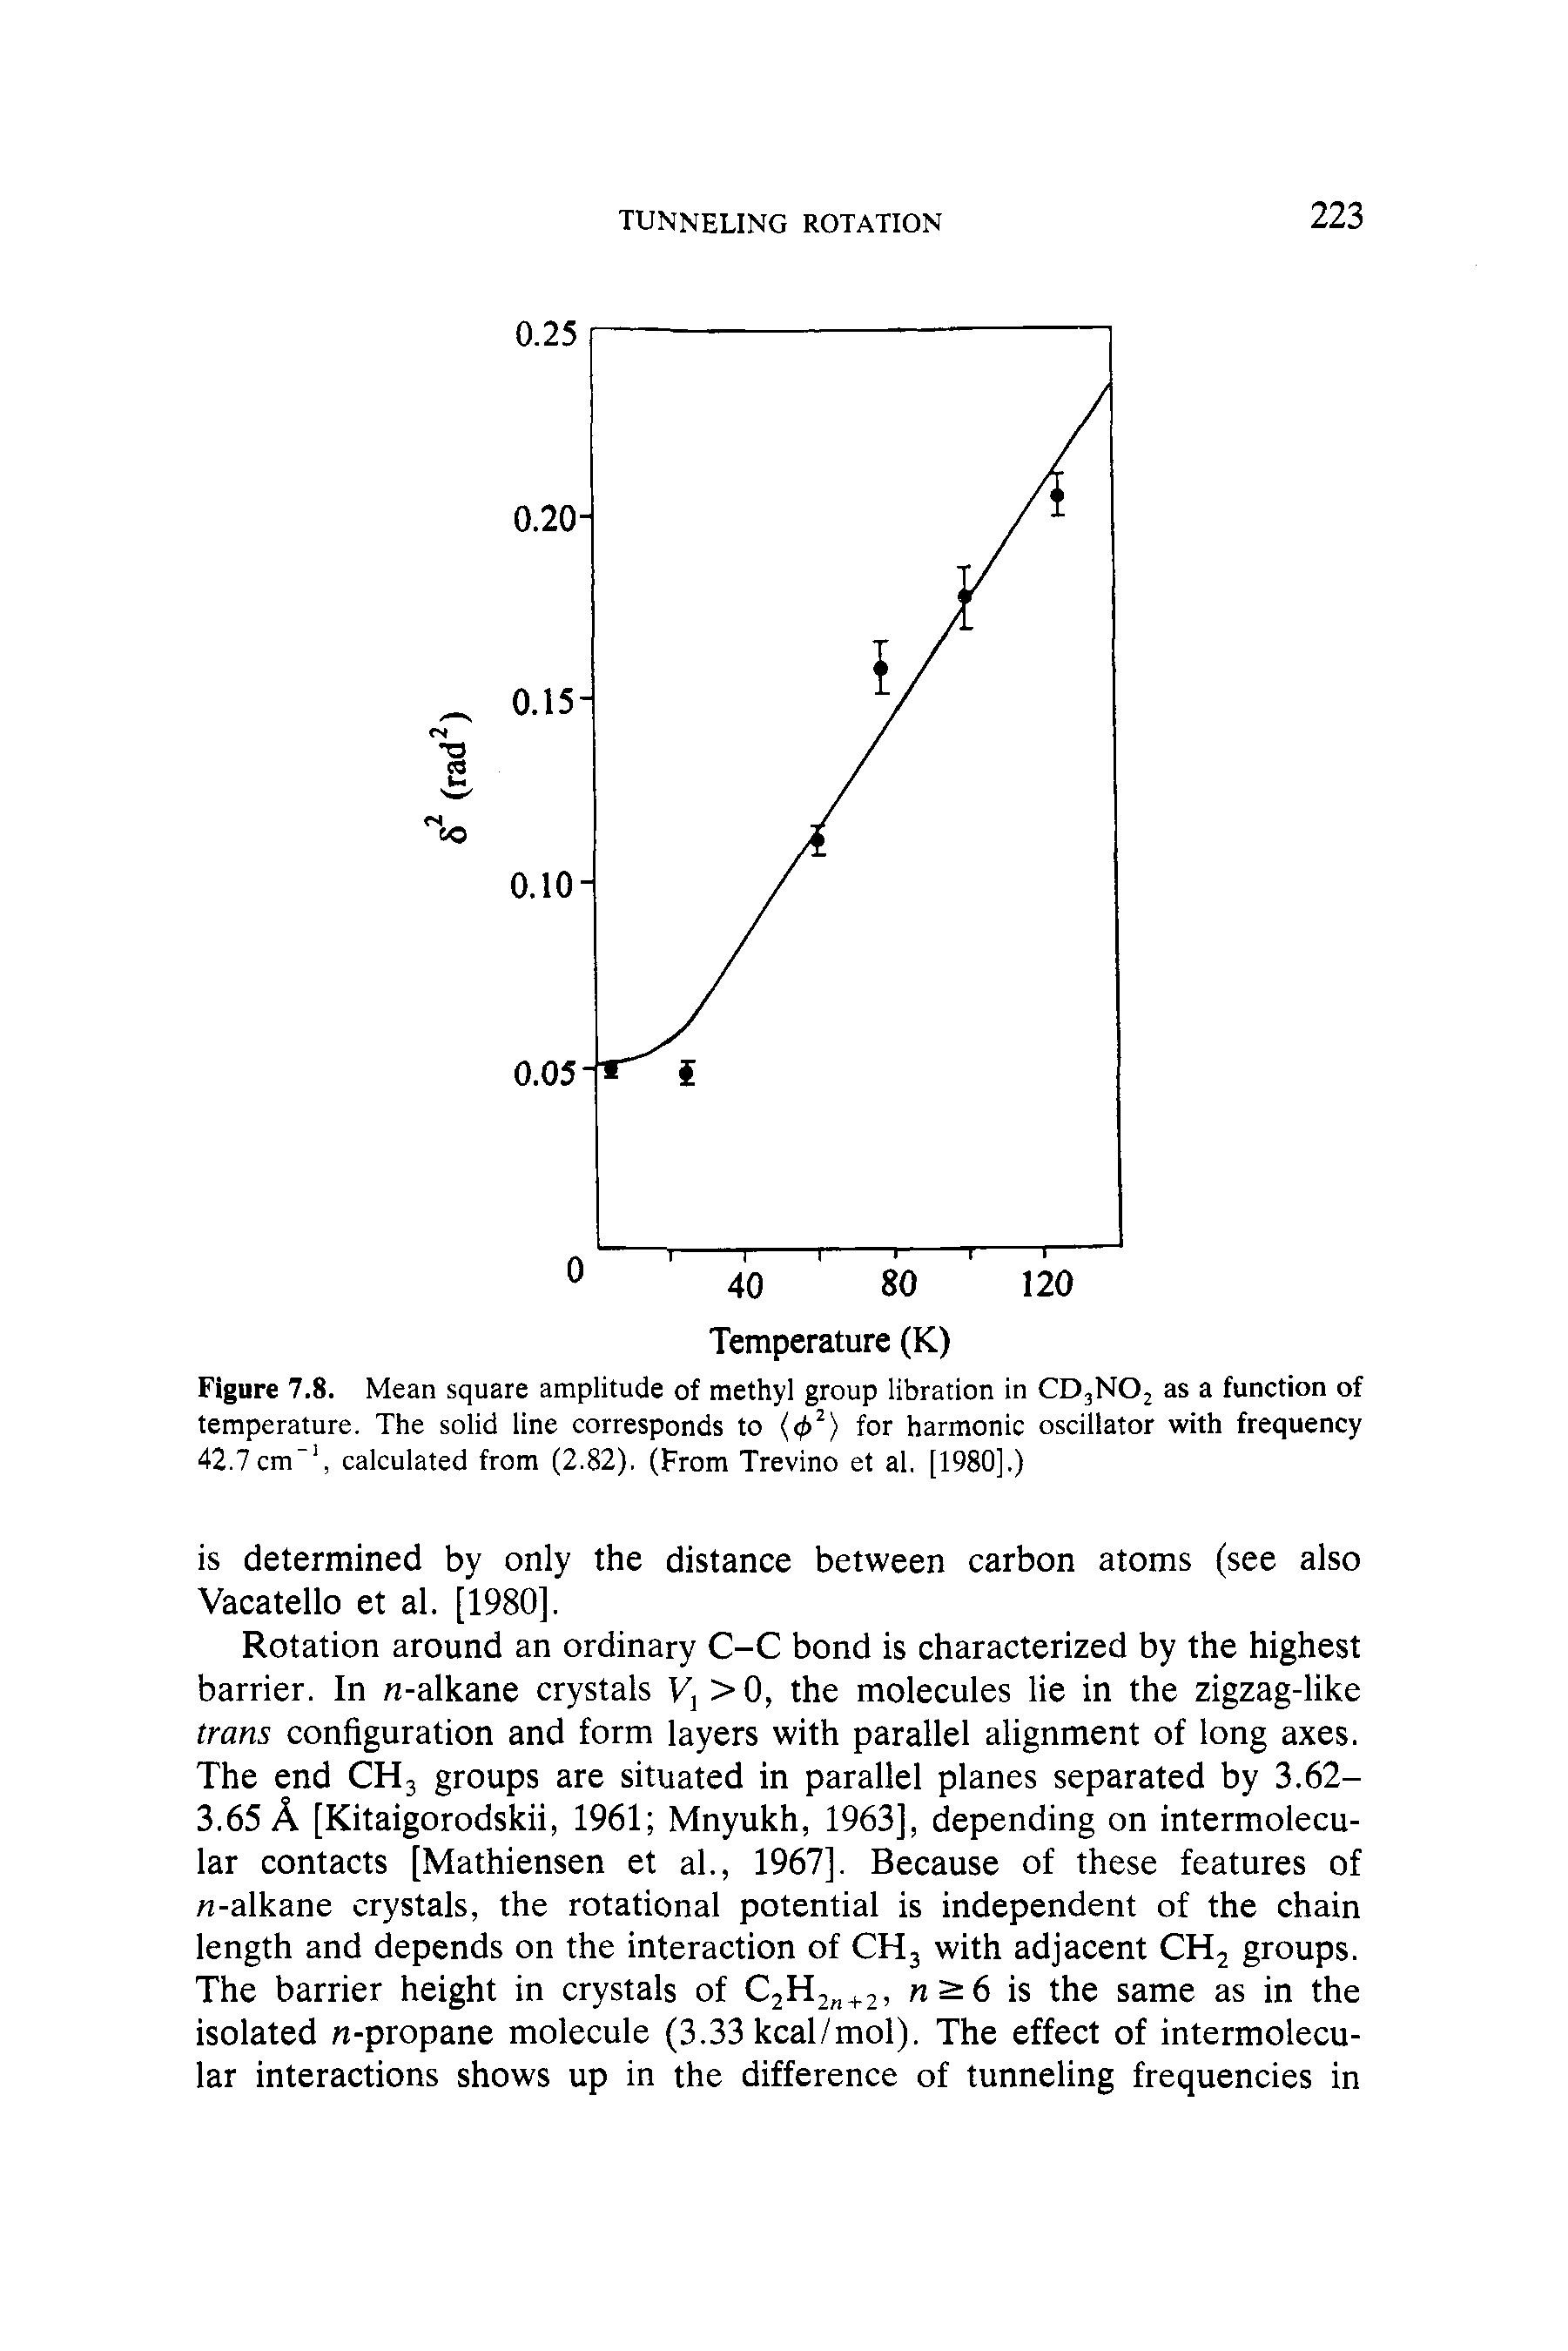 Figure 7.8. Mean square amplitude of methyl group libration in CD3N02 as a function of temperature. The solid line corresponds to (<j>2) for harmonic oscillator with frequency 42.7 cm-1, calculated from (2.82). (From Trevino et al. [1980].)...